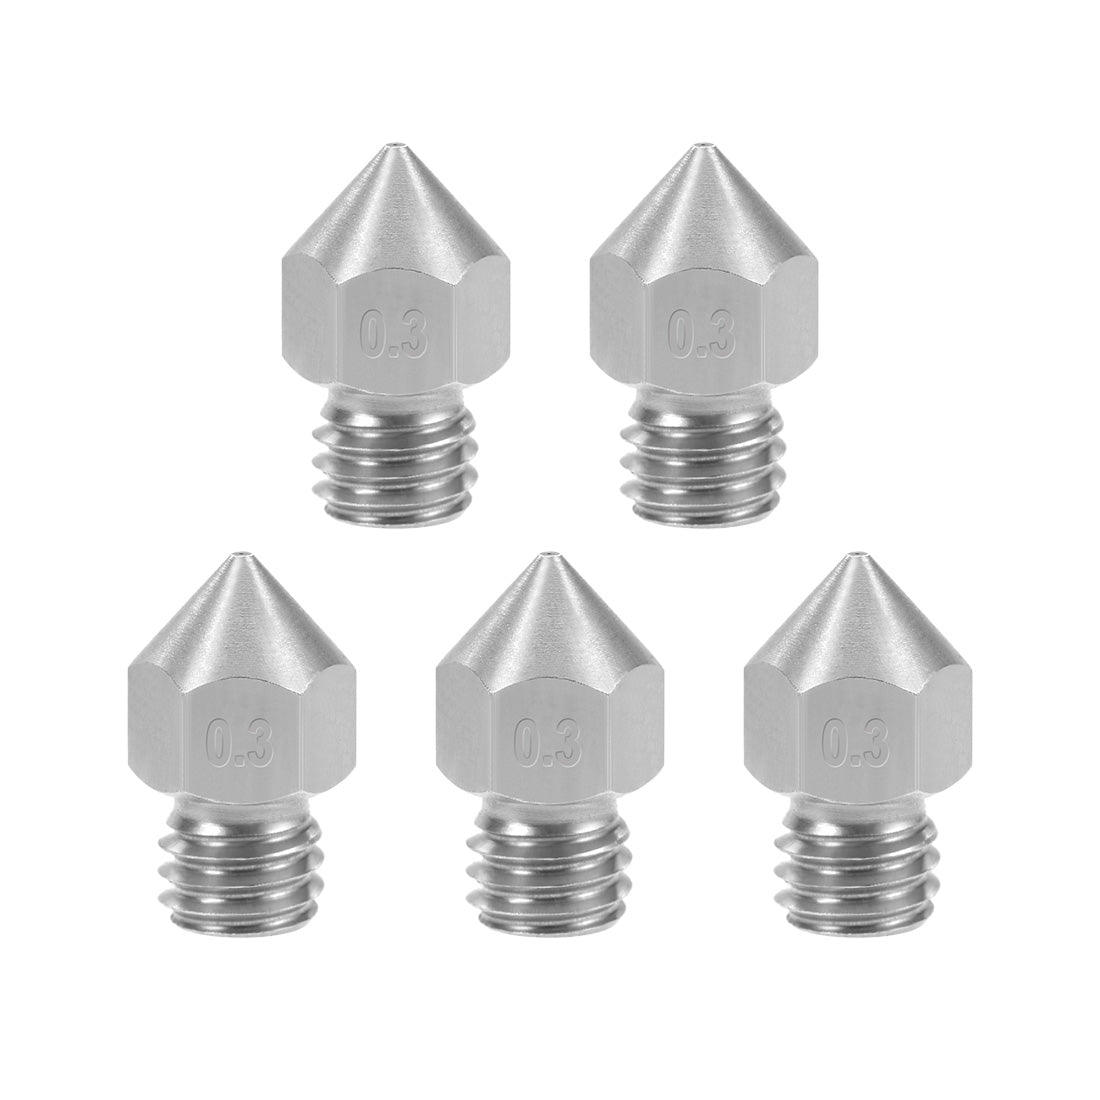 uxcell Uxcell 0.3mm 3D Printer Nozzle Head M6 for MK8 1.75mm, Stainless Steel 5pcs